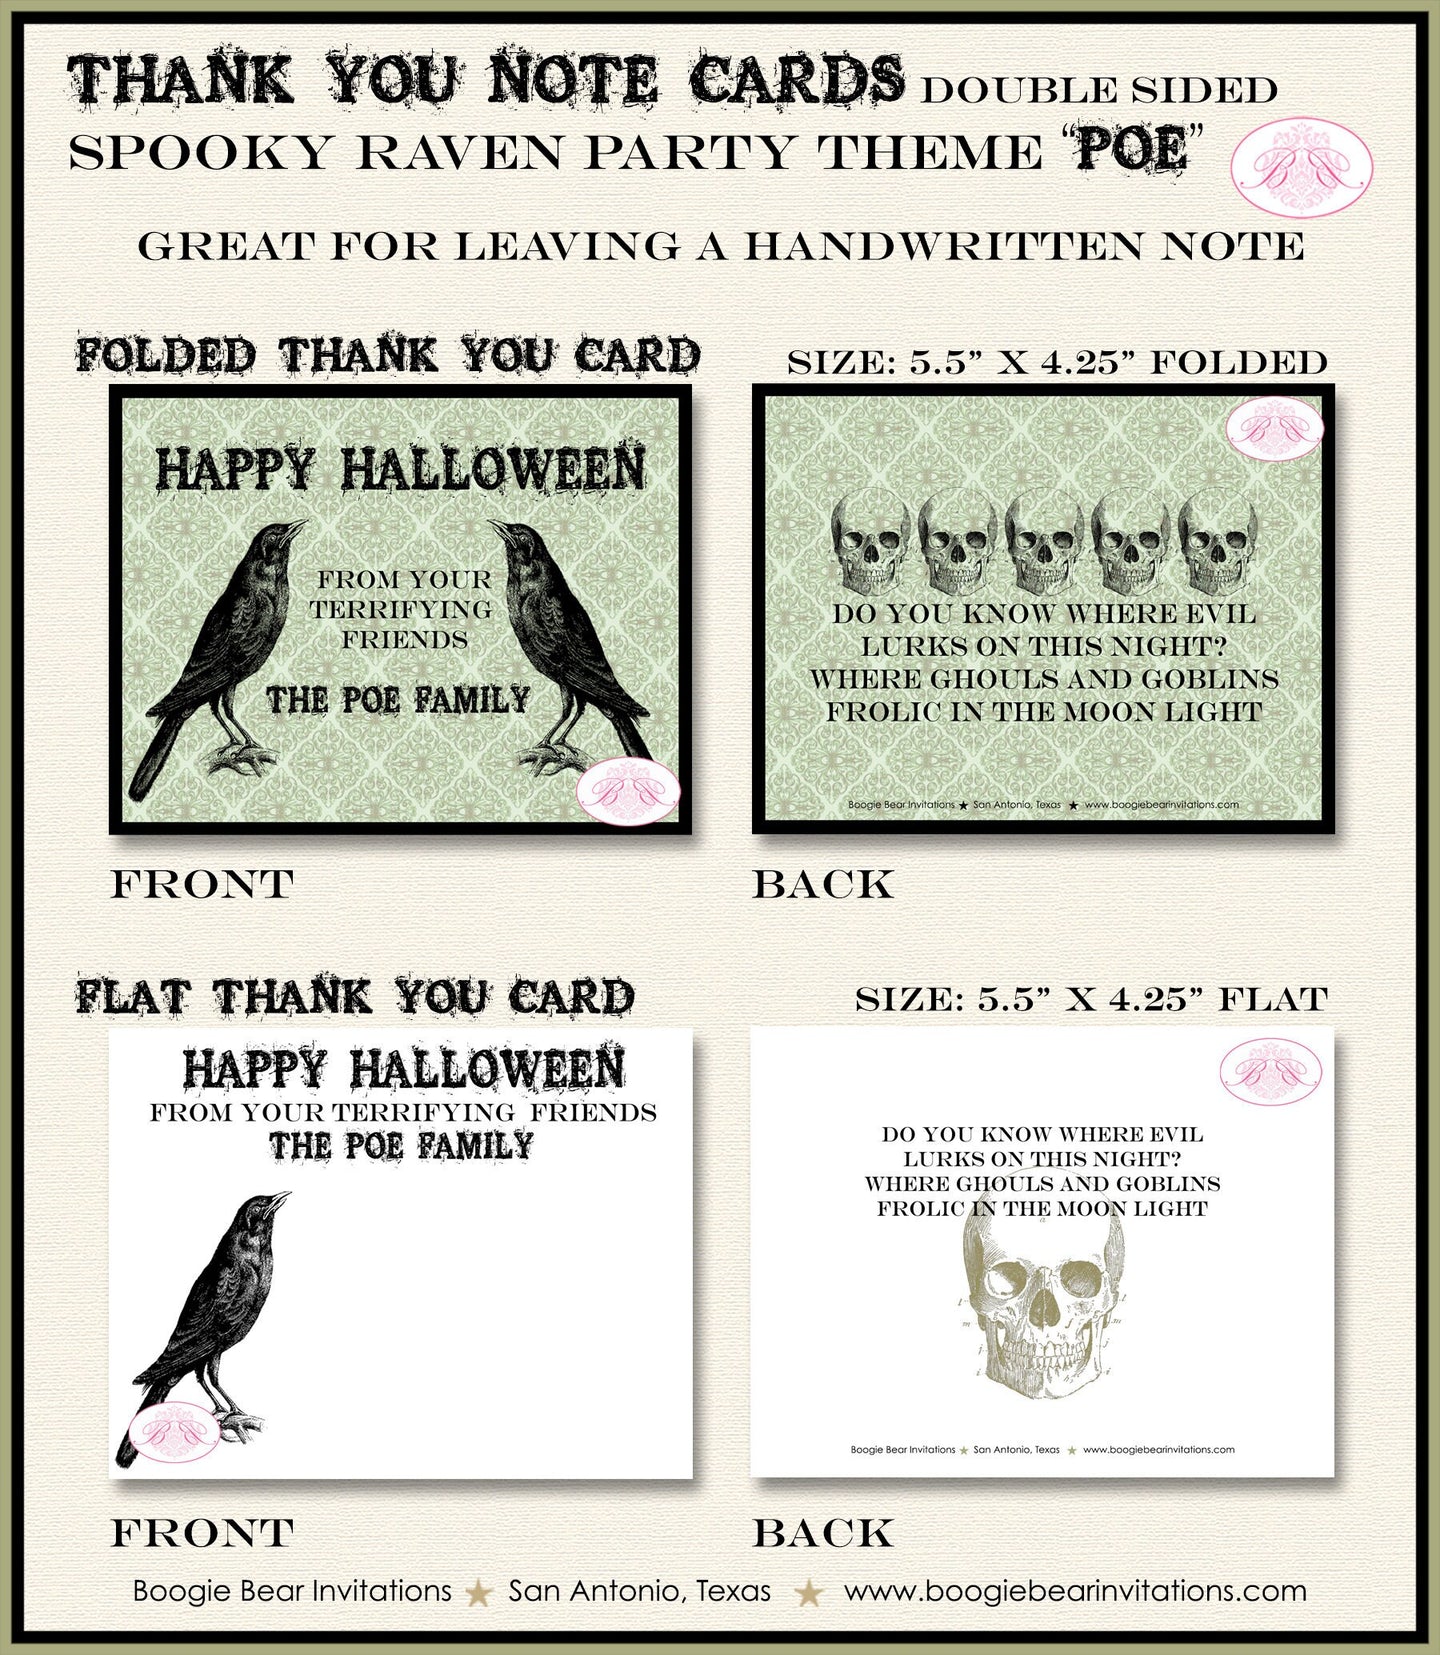 Spooky Raven Party Thank You Card Note Halloween Haunted House Rustic Skull Black Bird Crow Boogie Bear Invitations Poe Theme Printed